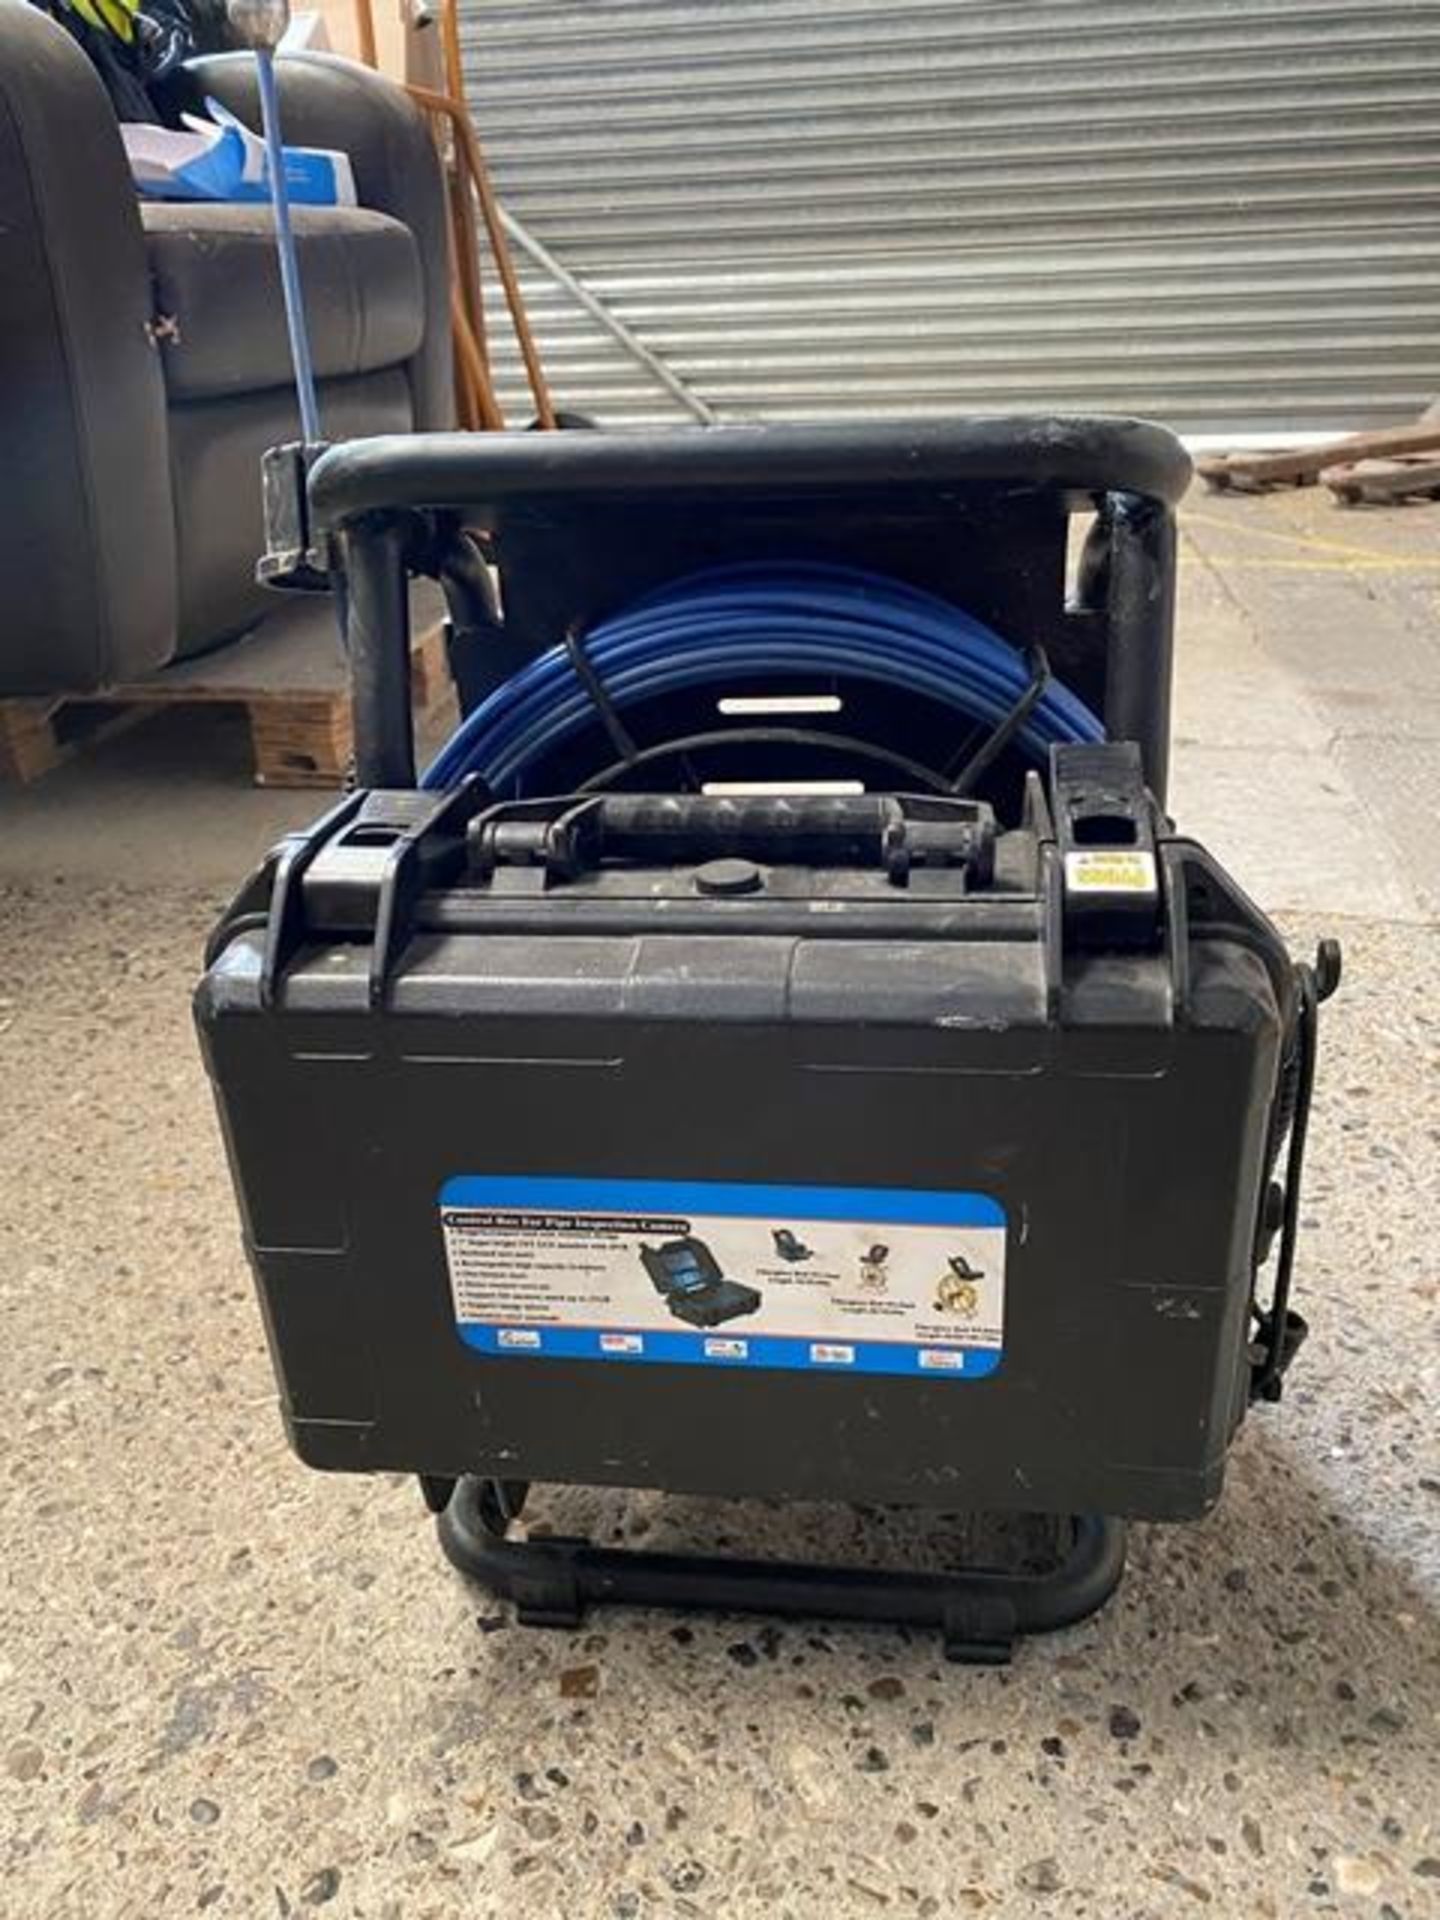 Drain pipe video inspection camera system complete with 40w fibreglass rod cable, IPX8 waterproof - Image 2 of 3